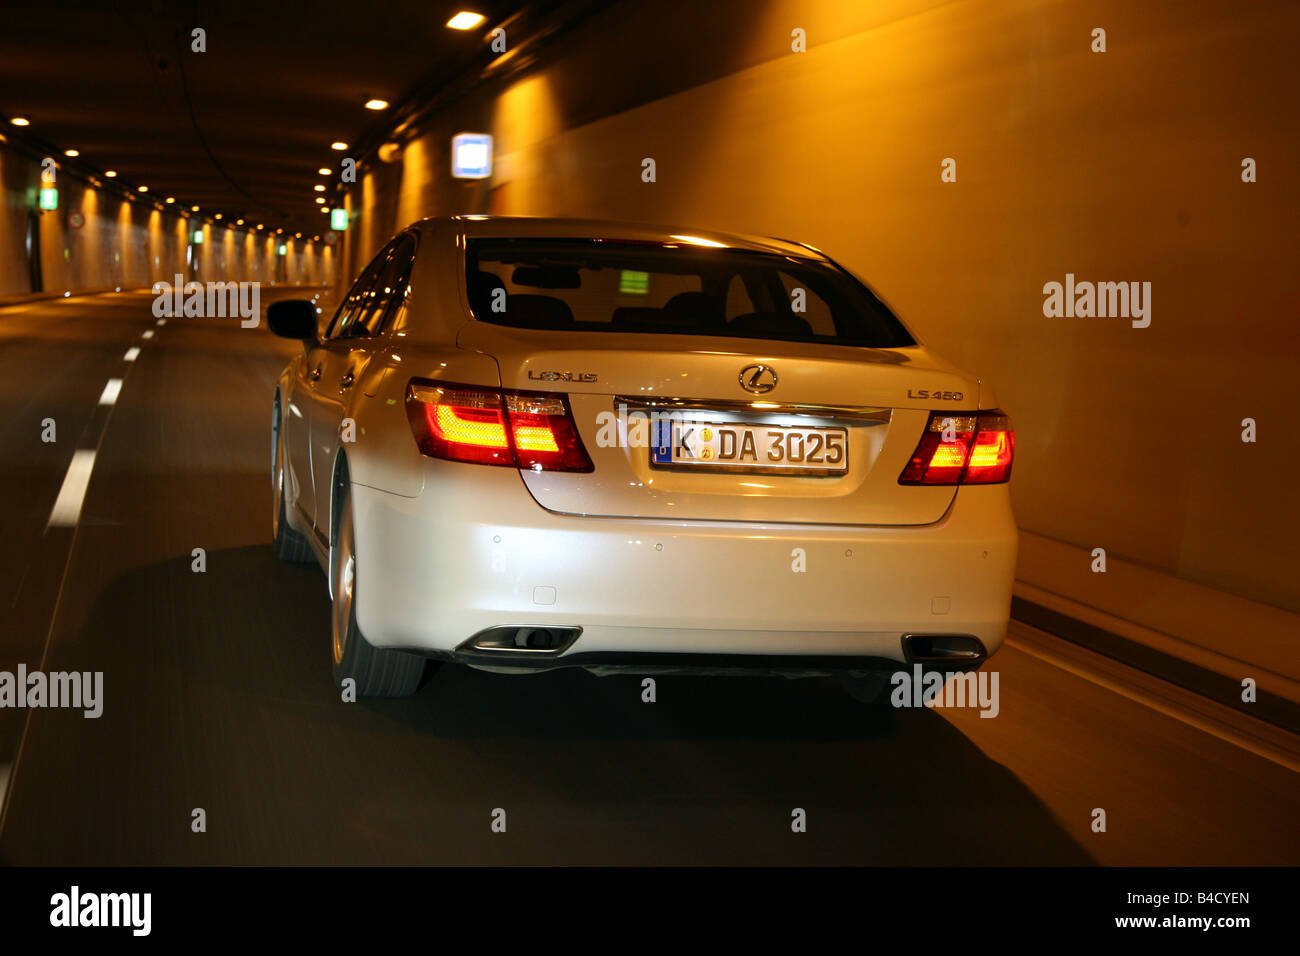 Lexus LS 460 Ambience Impression, model year 2007-, white, driving, diagonal from the back, rear view, City, Tunnel Stock Photo